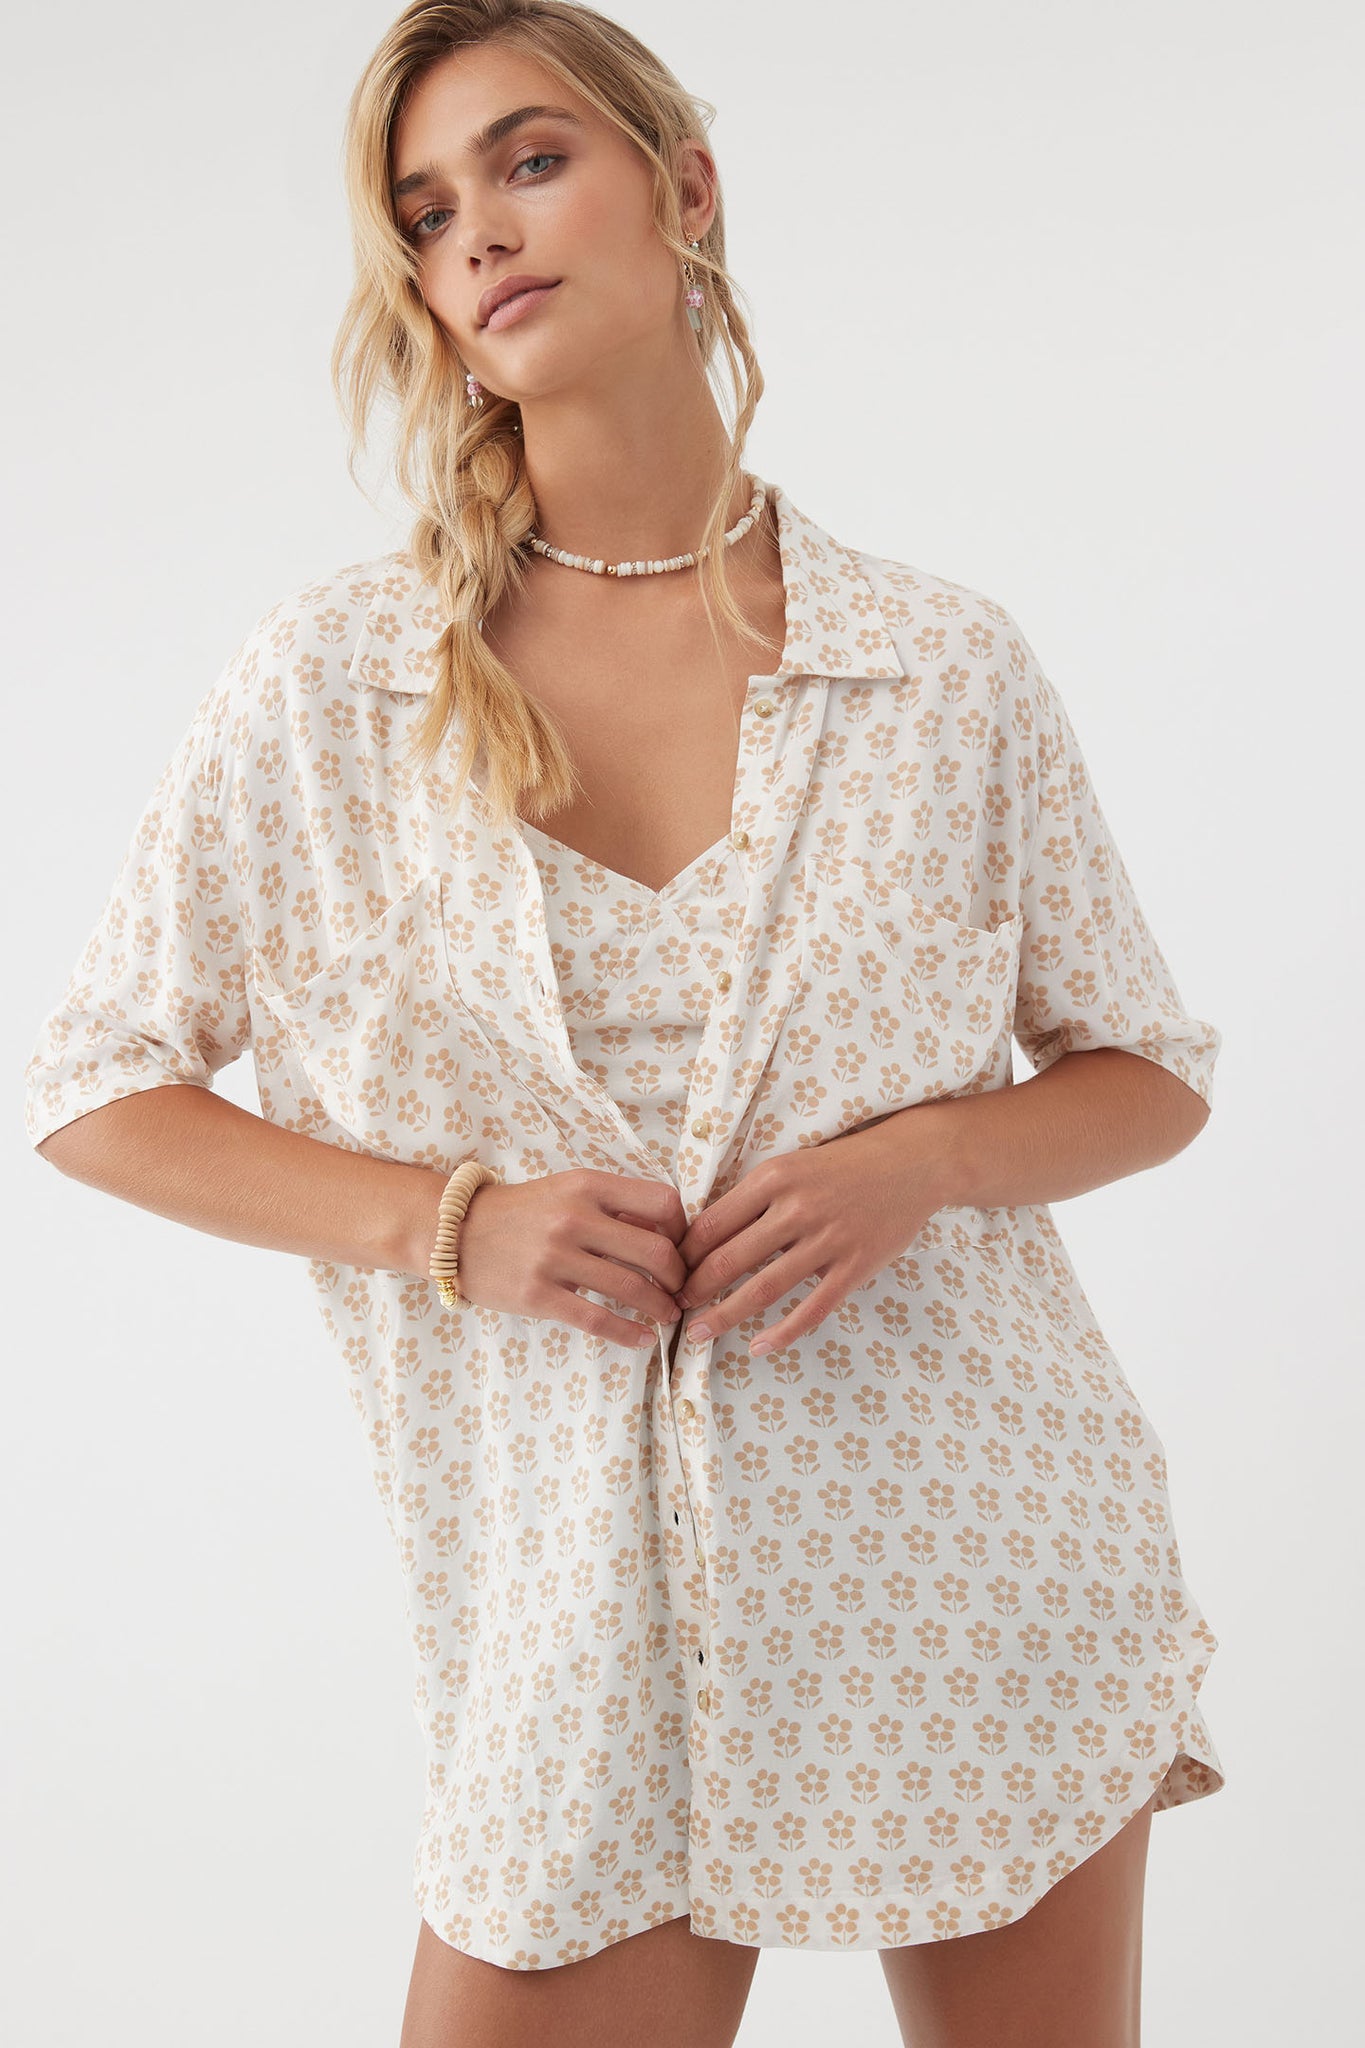 TRICIA DAISY BUTTON-UP TOP